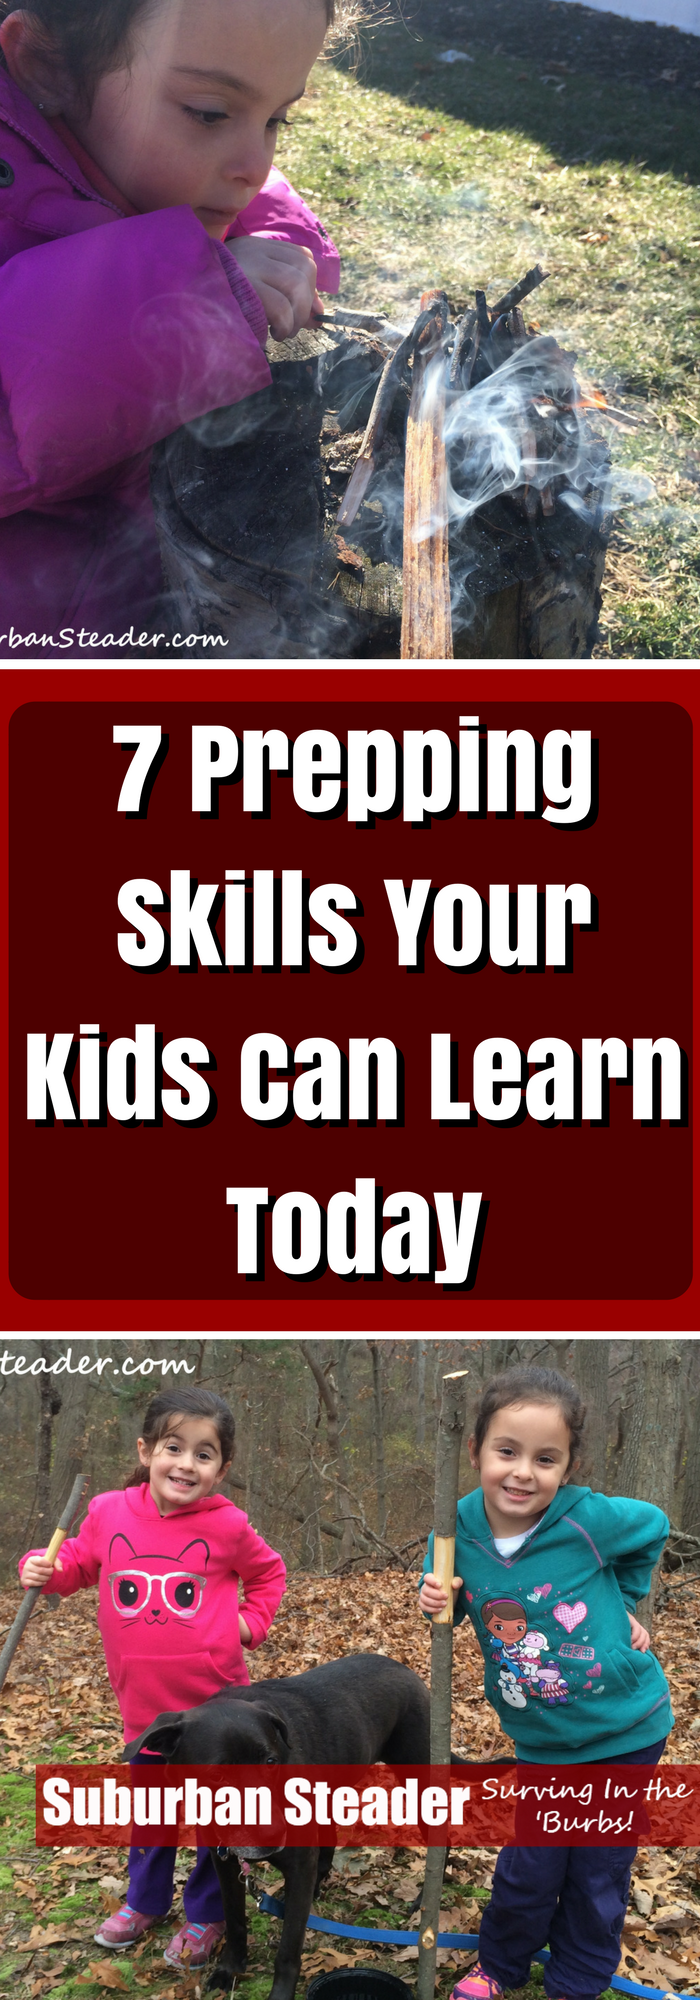 7 Prepping Skills Your Kids Can Learn Today